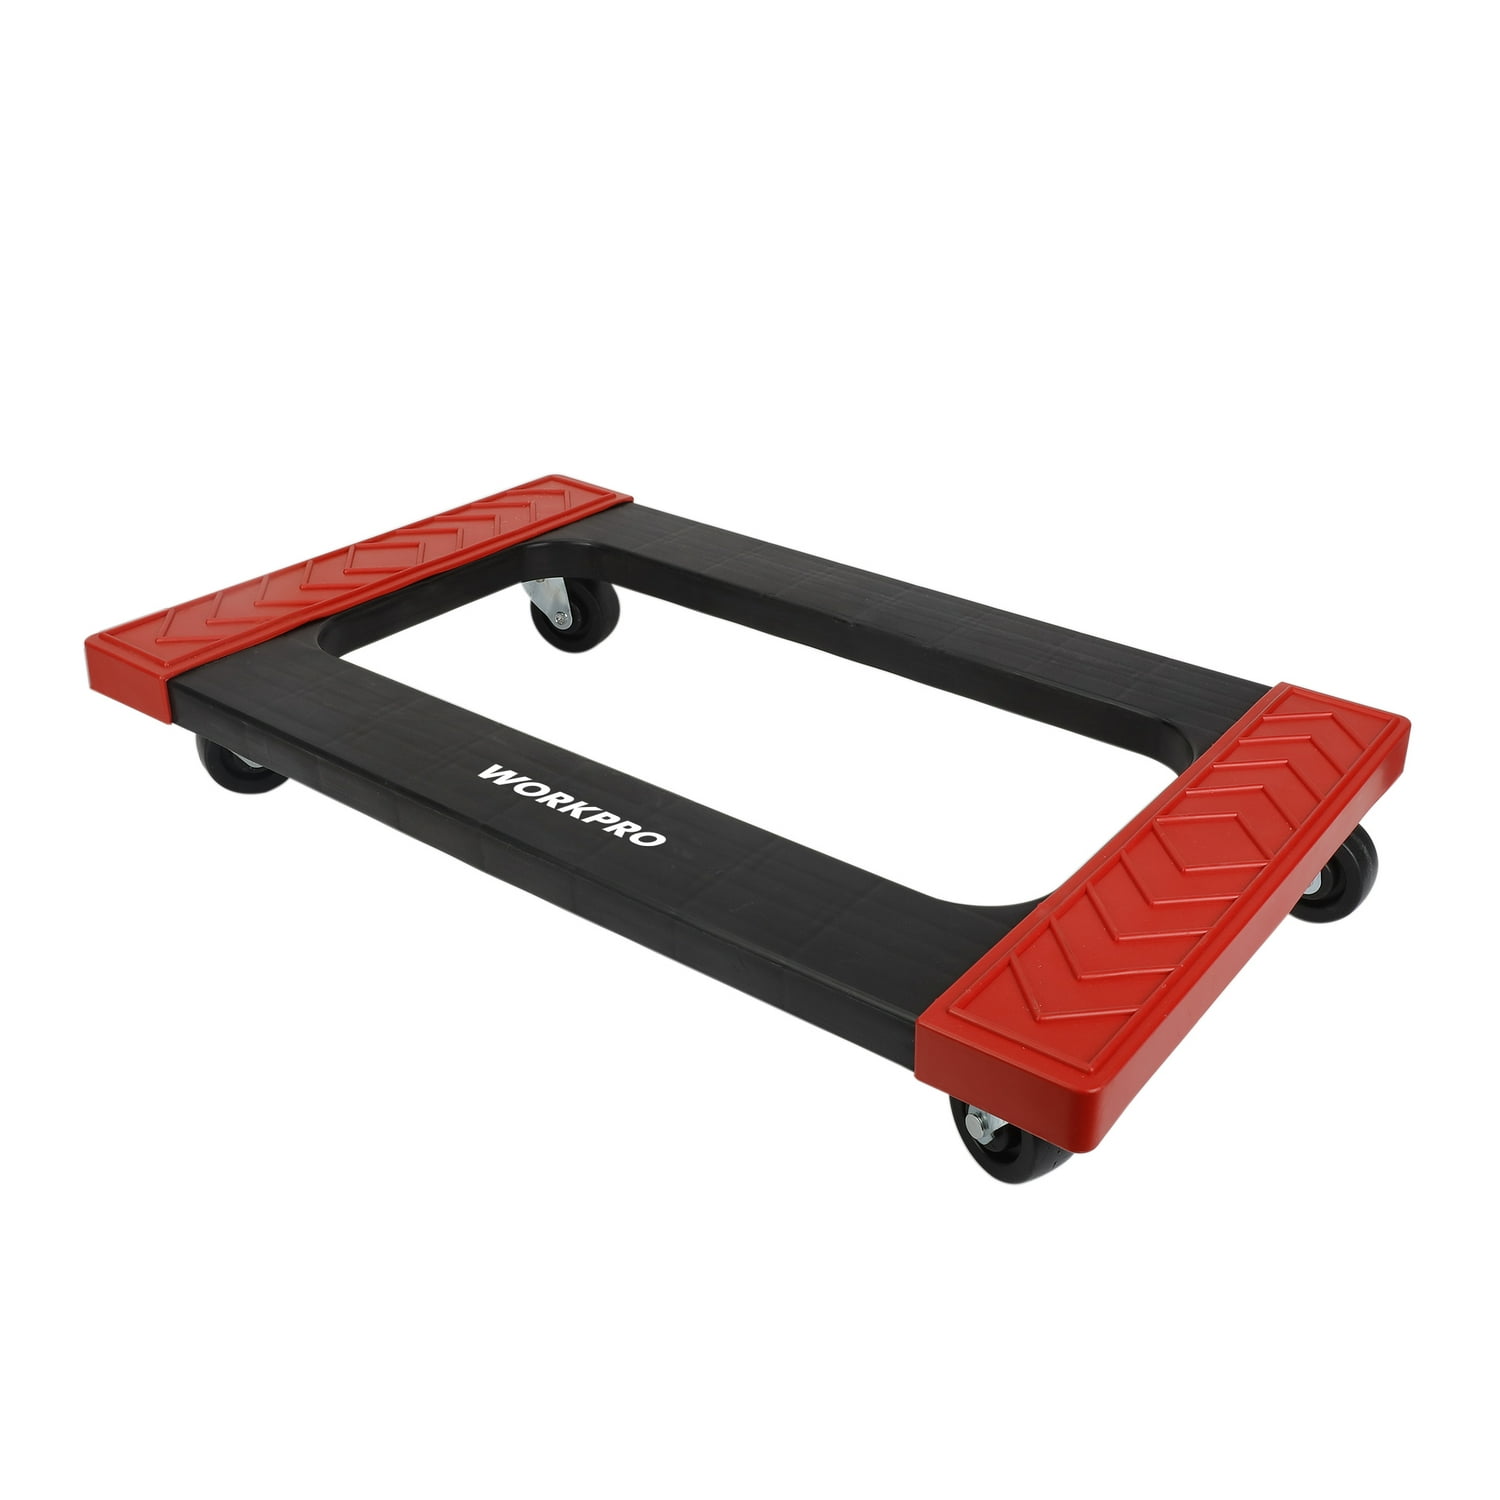 30” WORKPRO Plastic Moving Dolly (800-lb Capacity) $20 + Free Shipping w/ Walmart+ or $35+